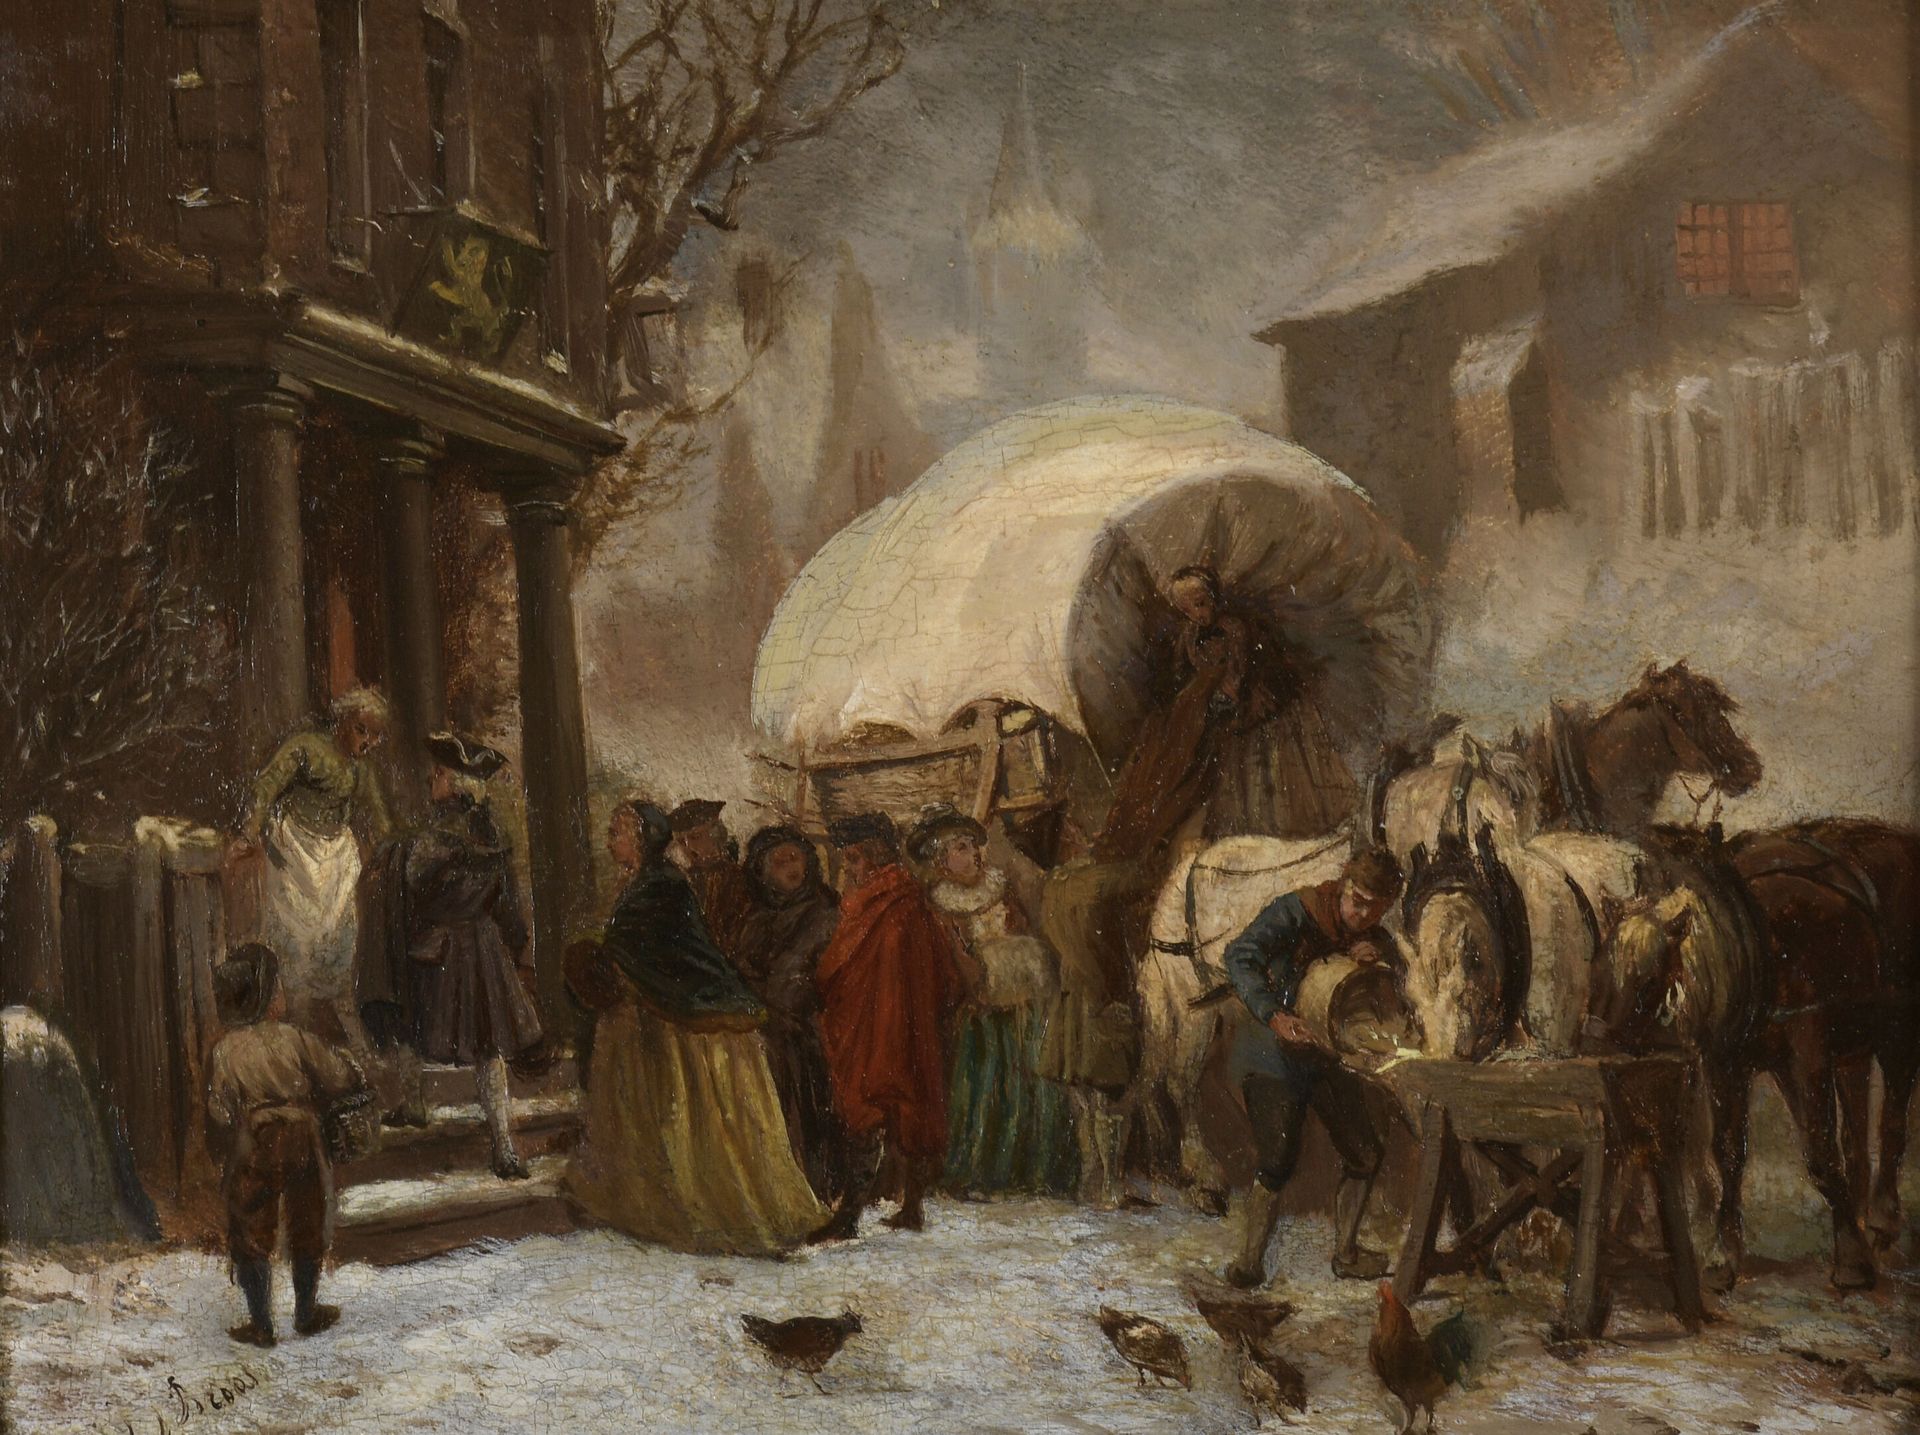 Null Jan Jacob ZUIDEMA BROOS (1833-1882) 

"The Stagecoach"

Oil on panel, signe&hellip;